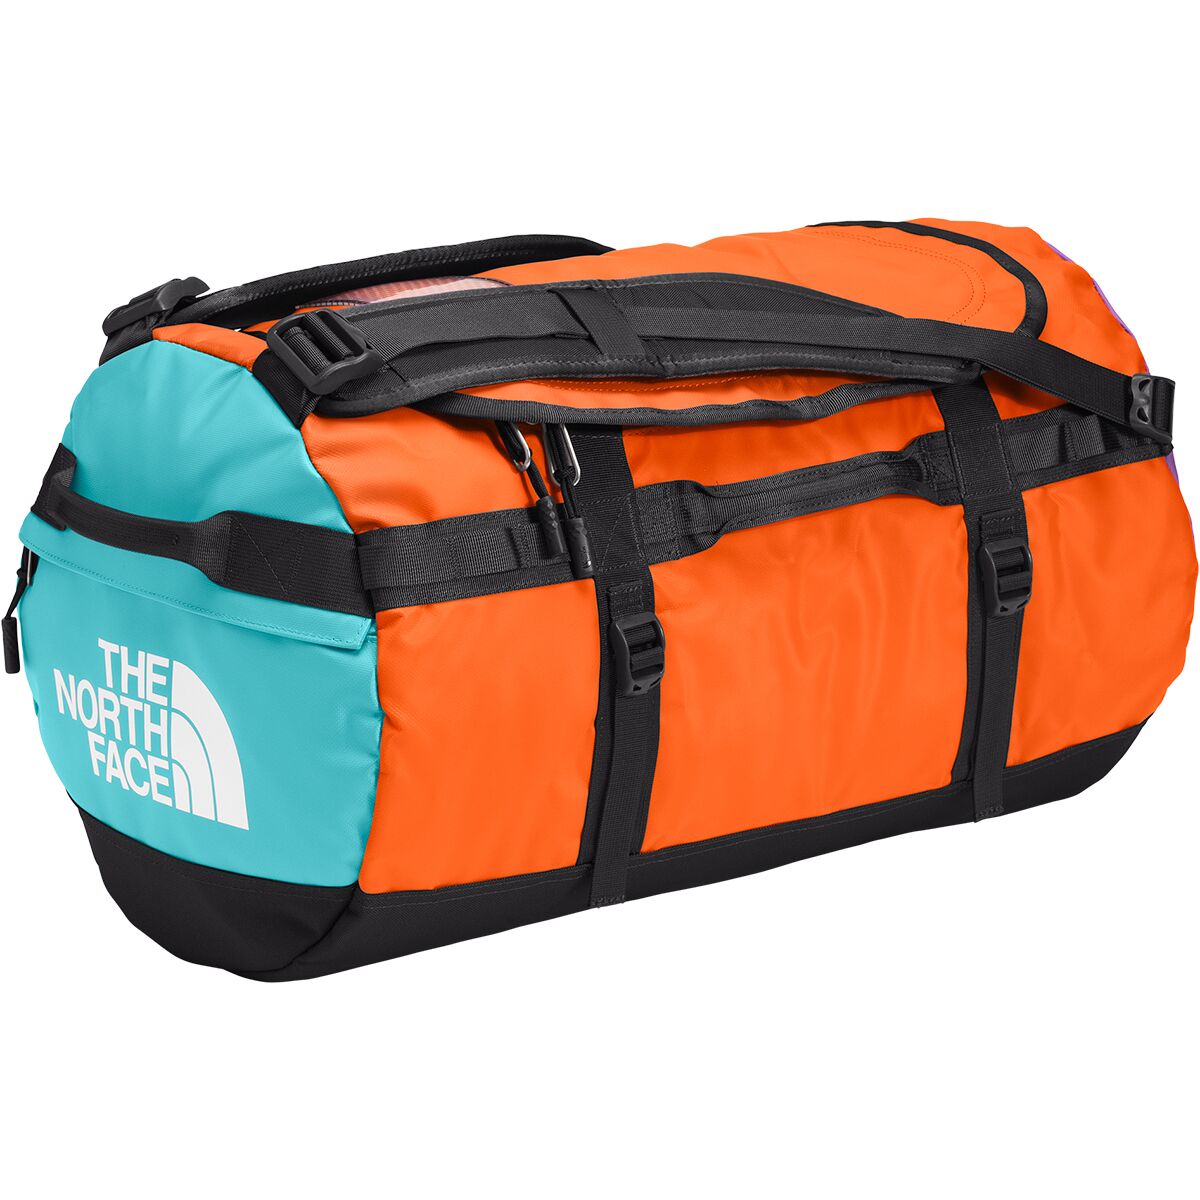 The North Face Base Camp S 50L Duffel Bag - Accessories